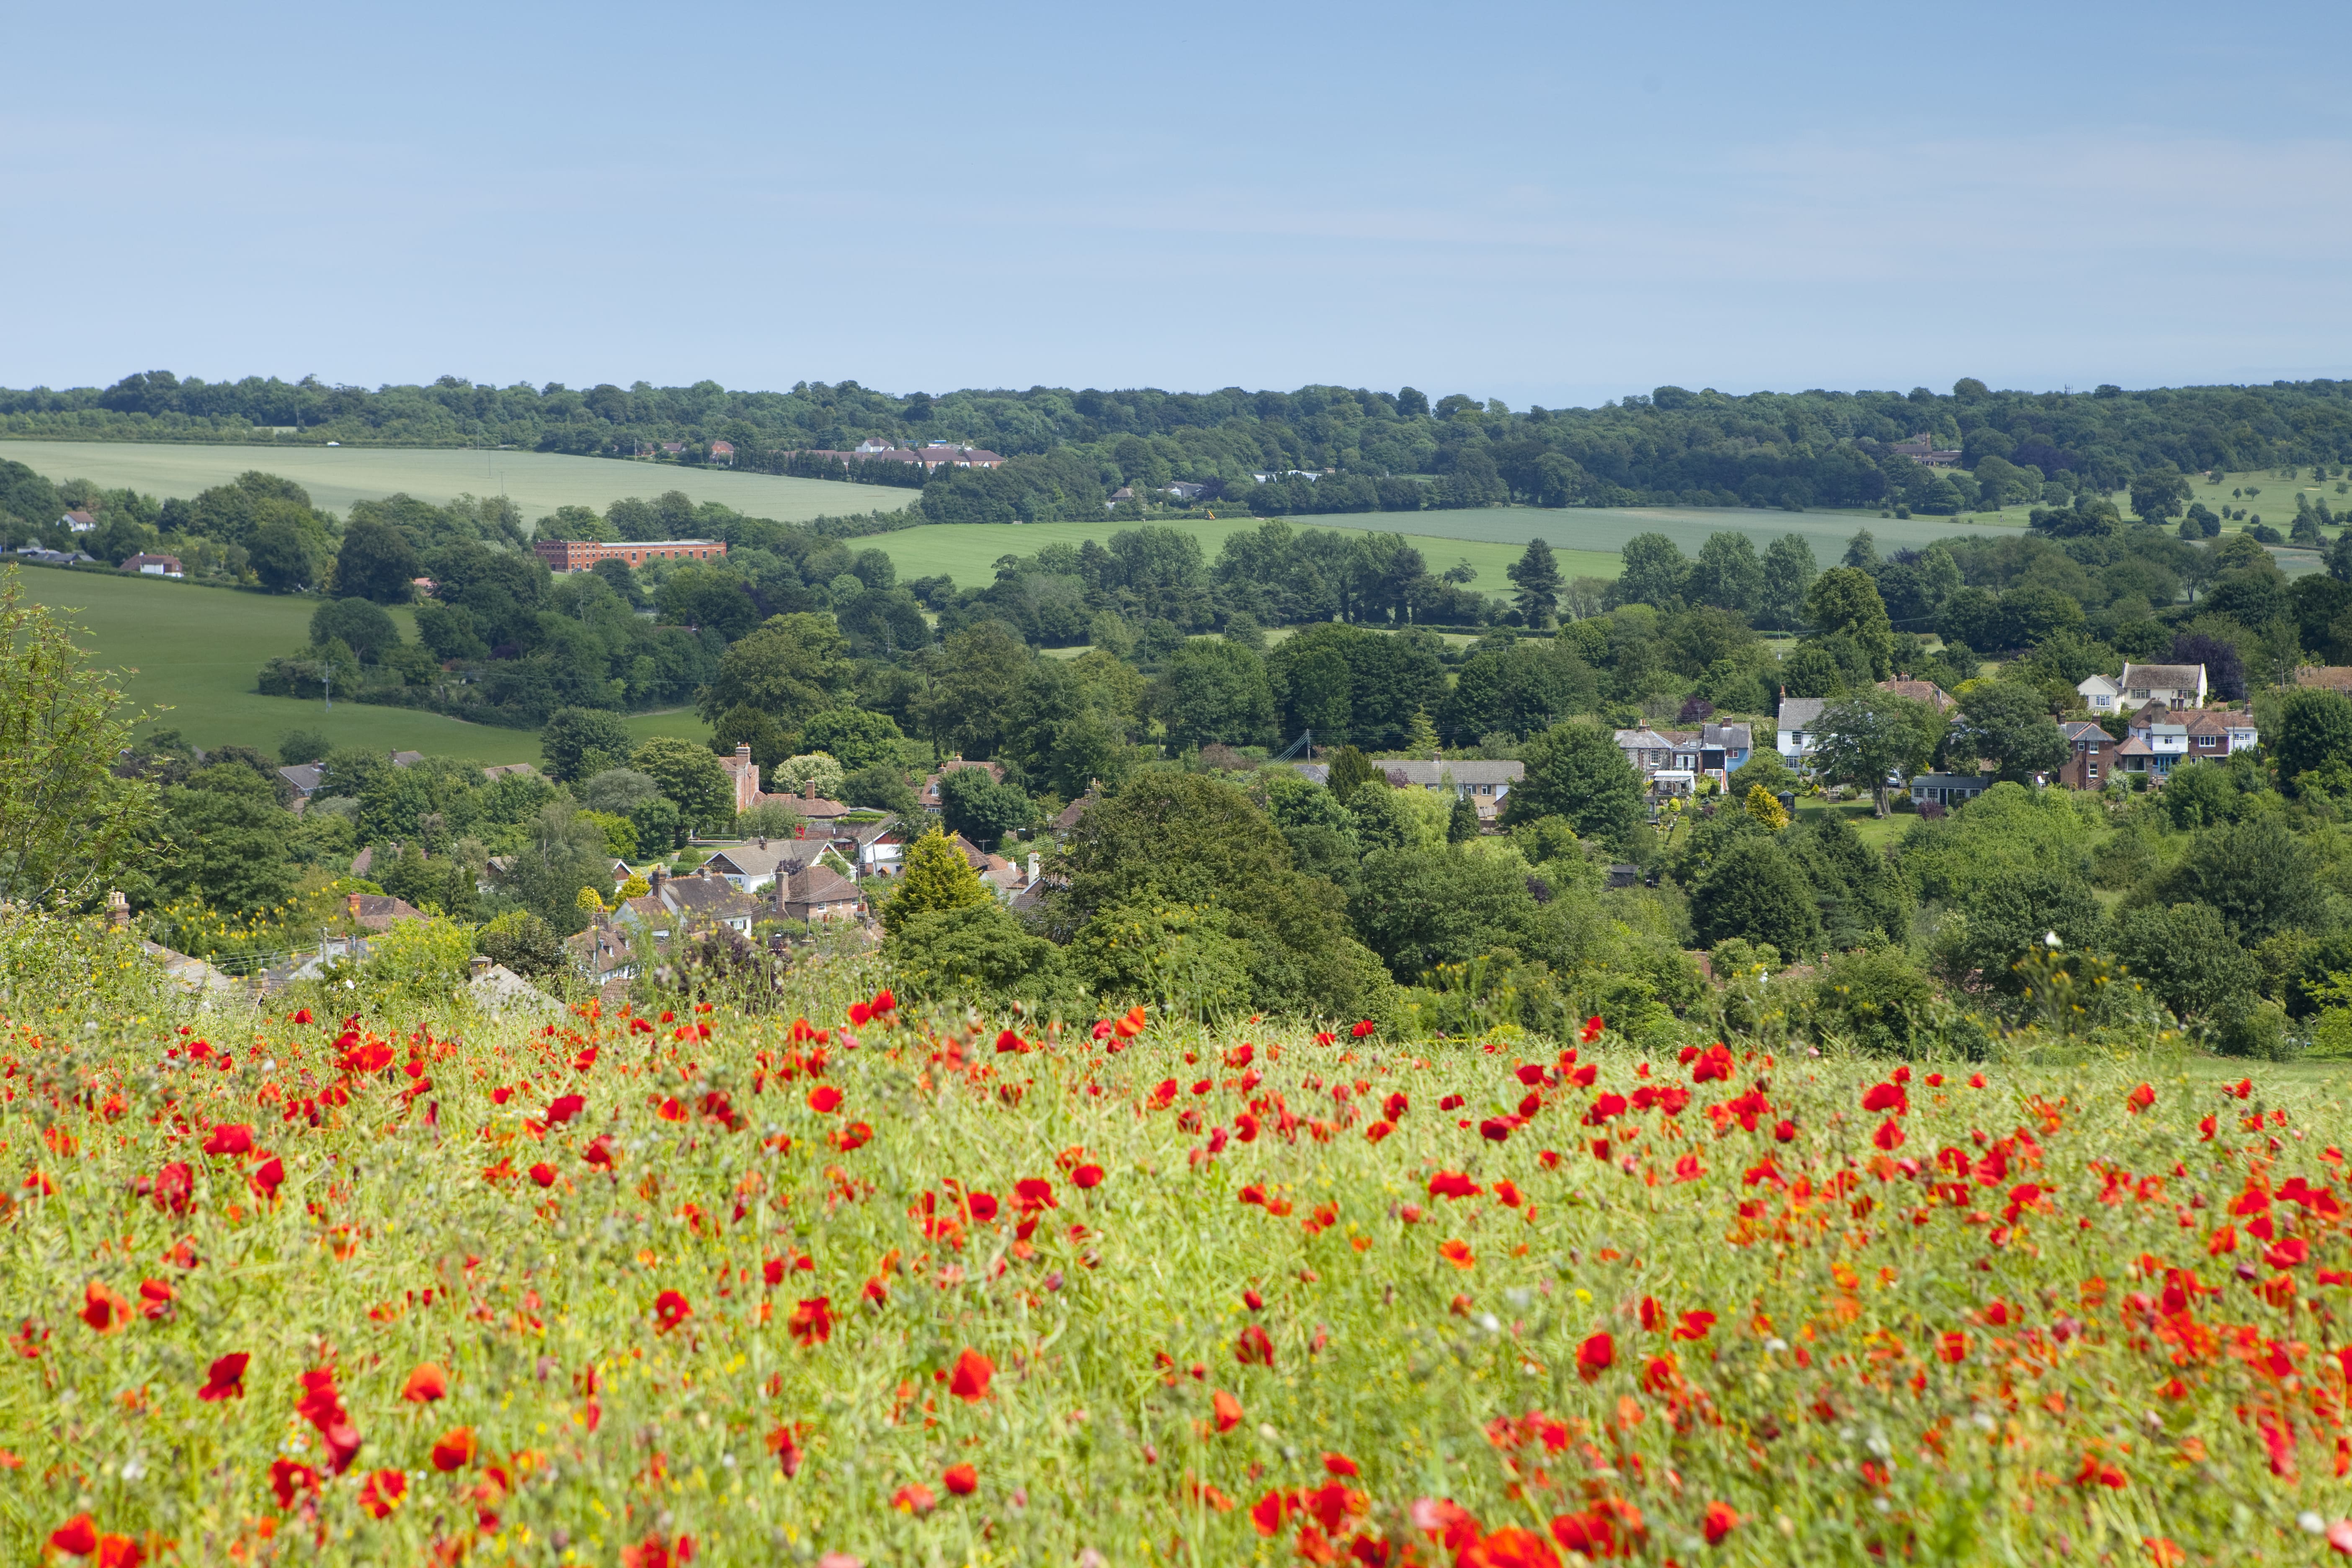 Poppy field overlooking Elham village. Trees, fields and houses in distance.